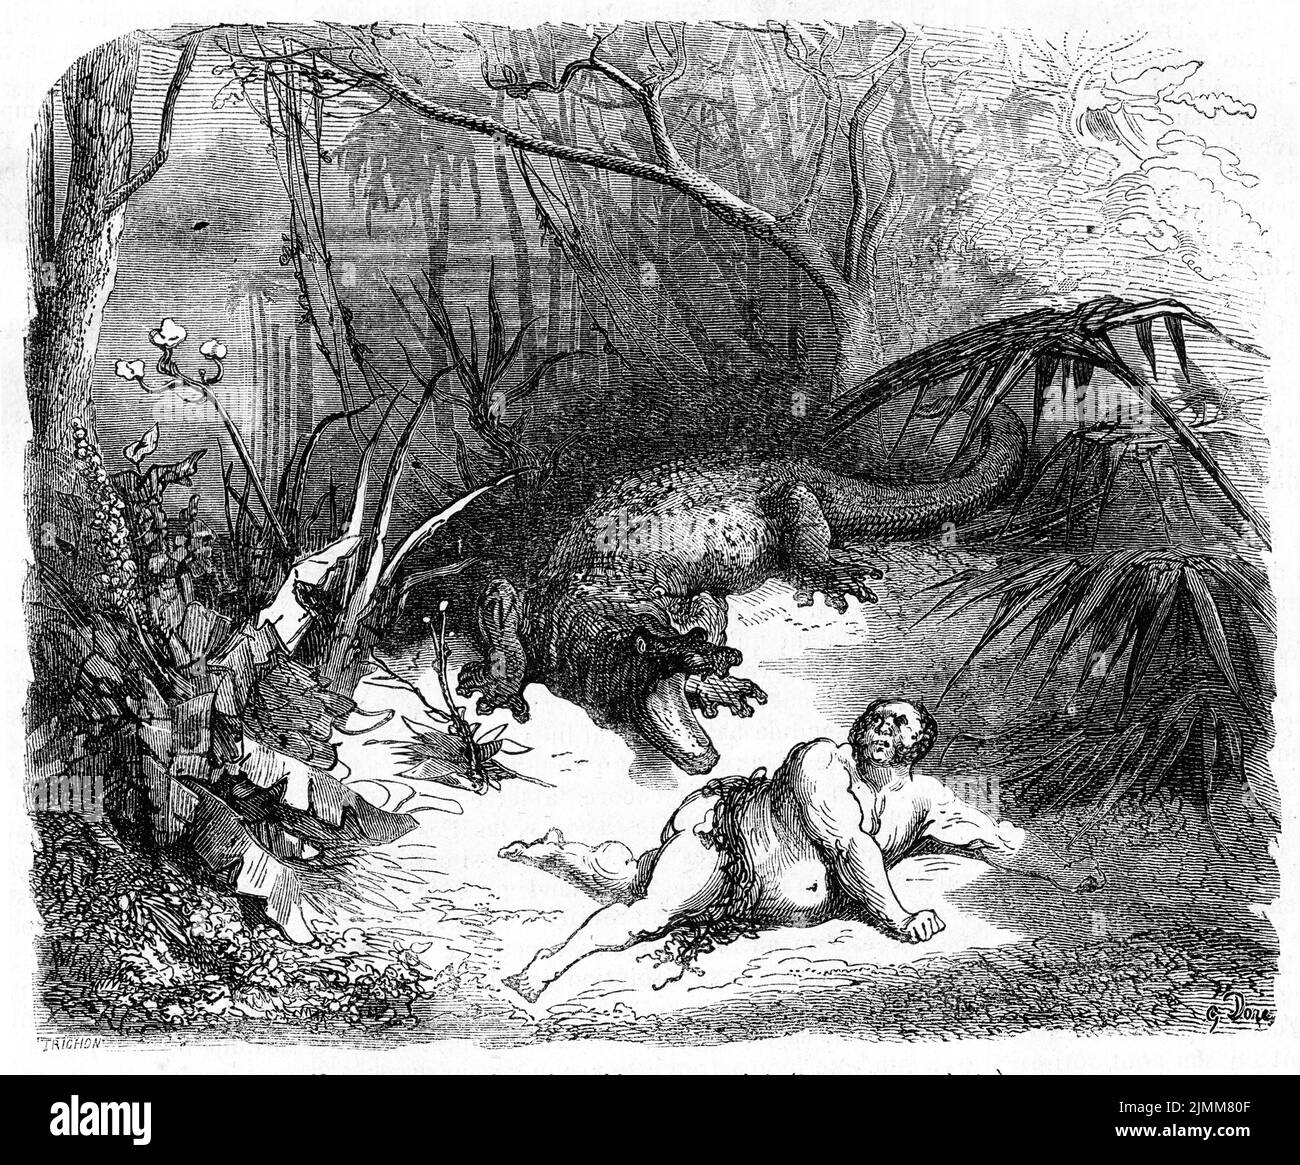 Engraving of a crocodile threatening an overweight man Stock Photo